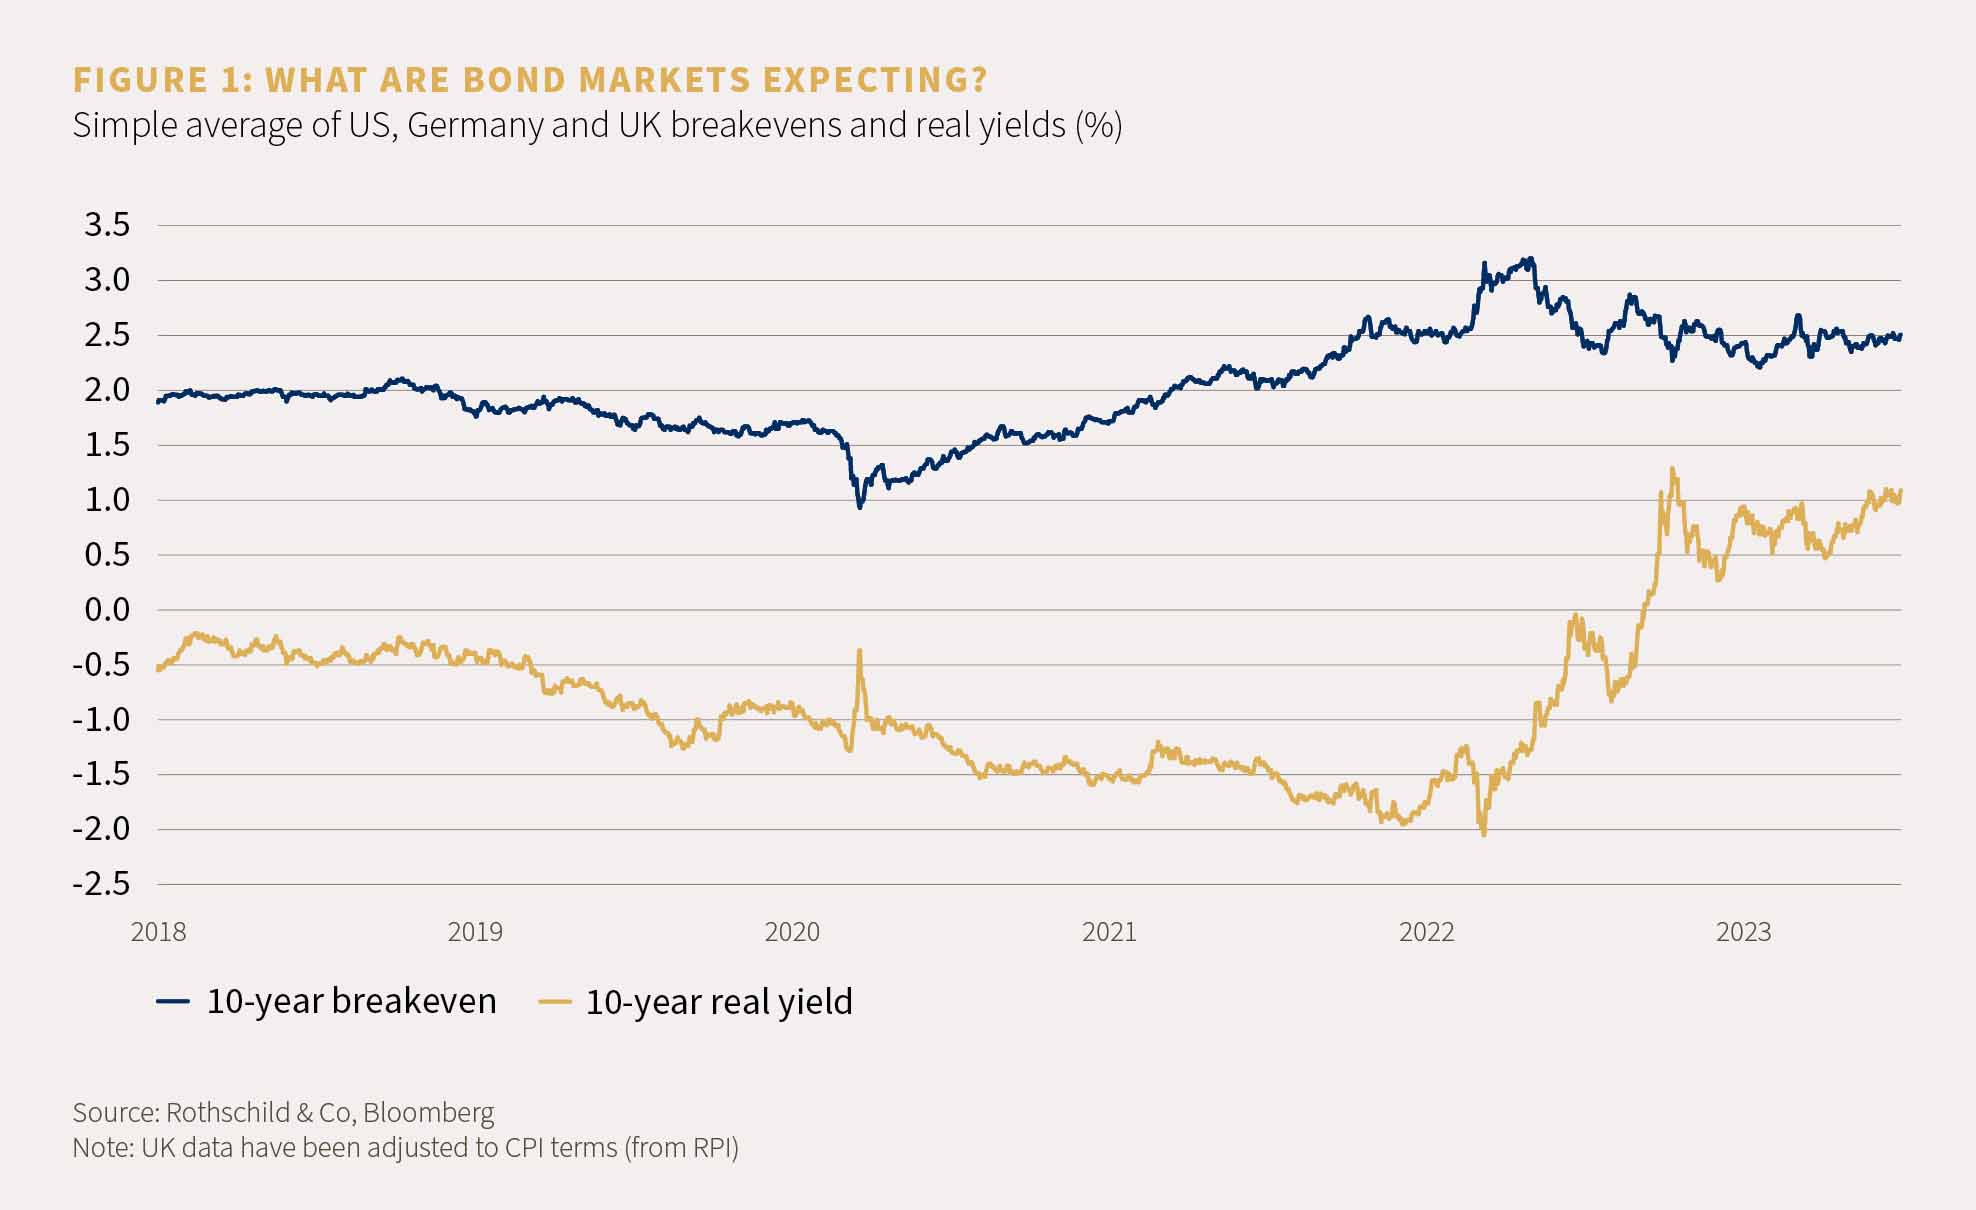 Chart showing the simple average of US, Germany and UK breakevens and real yields